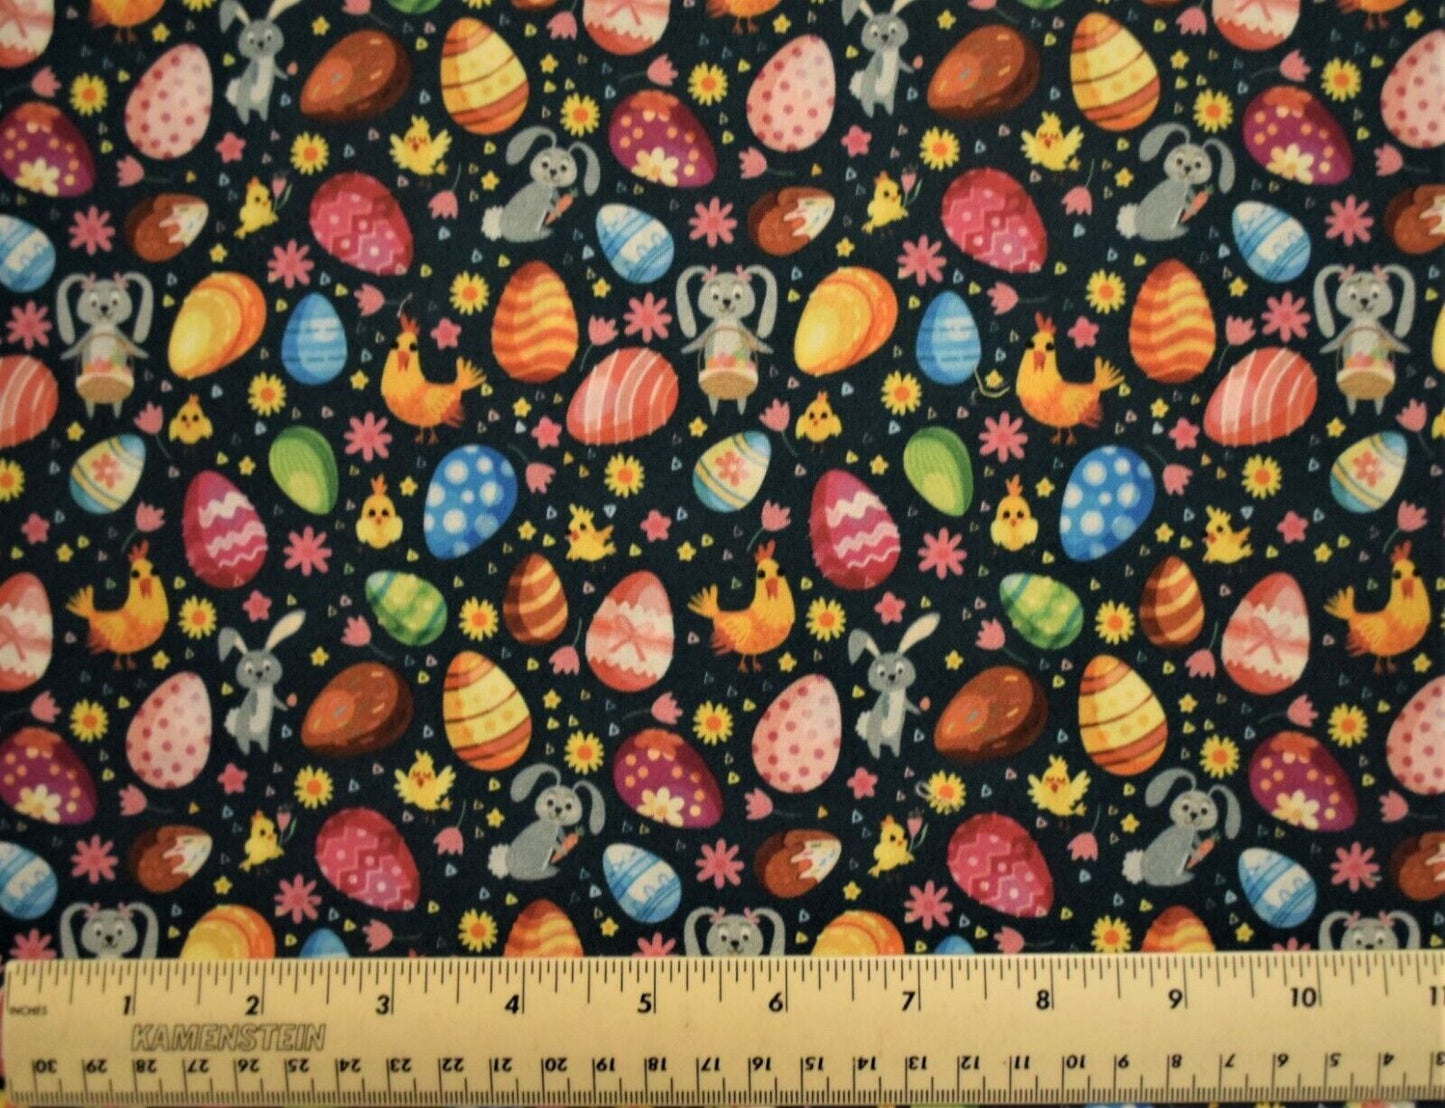 45 x 36 Easter Bunny and Eggs on Black Digital Print 100% Cotton Fabric